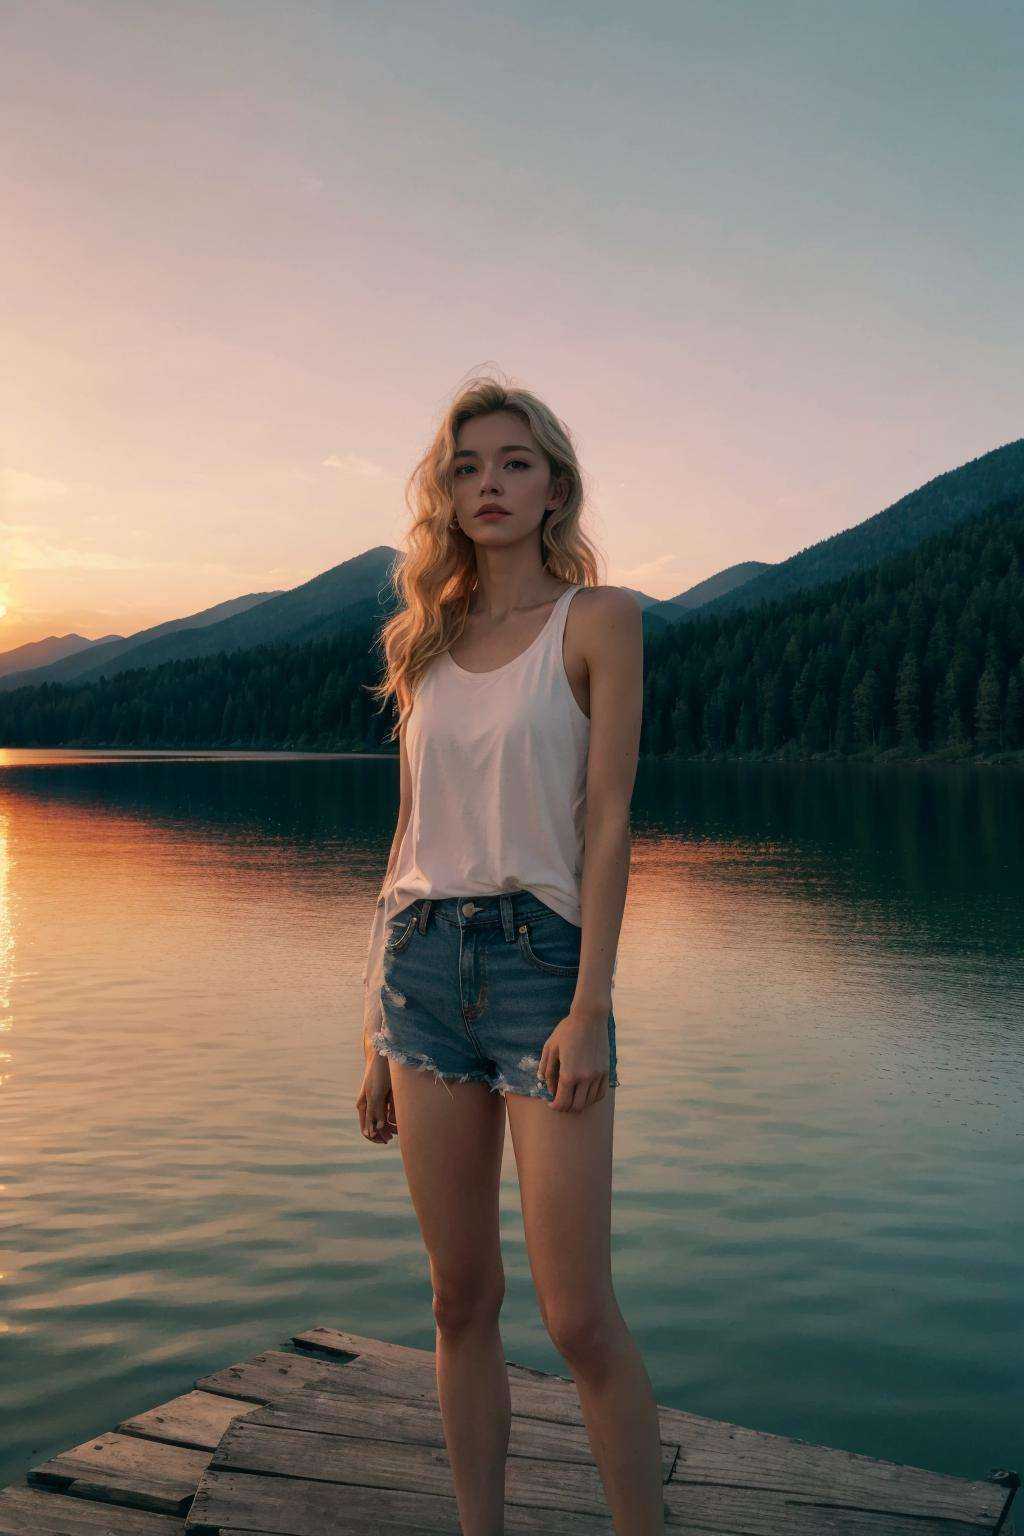 A young woman stands on a weathered wooden dock extending over a still mountain lake at dusk. Dressed in cutoff denim shorts and a loose white **** top, she gazes pensively over the glassy waters with hands in her pockets. Her long honey-blonde hair glows in the golden light of the setting sun. A sense of peace and solitude pervades this high alpine scene at day's end as the sky fades into pastel hues and the loons begin their plaintive calls